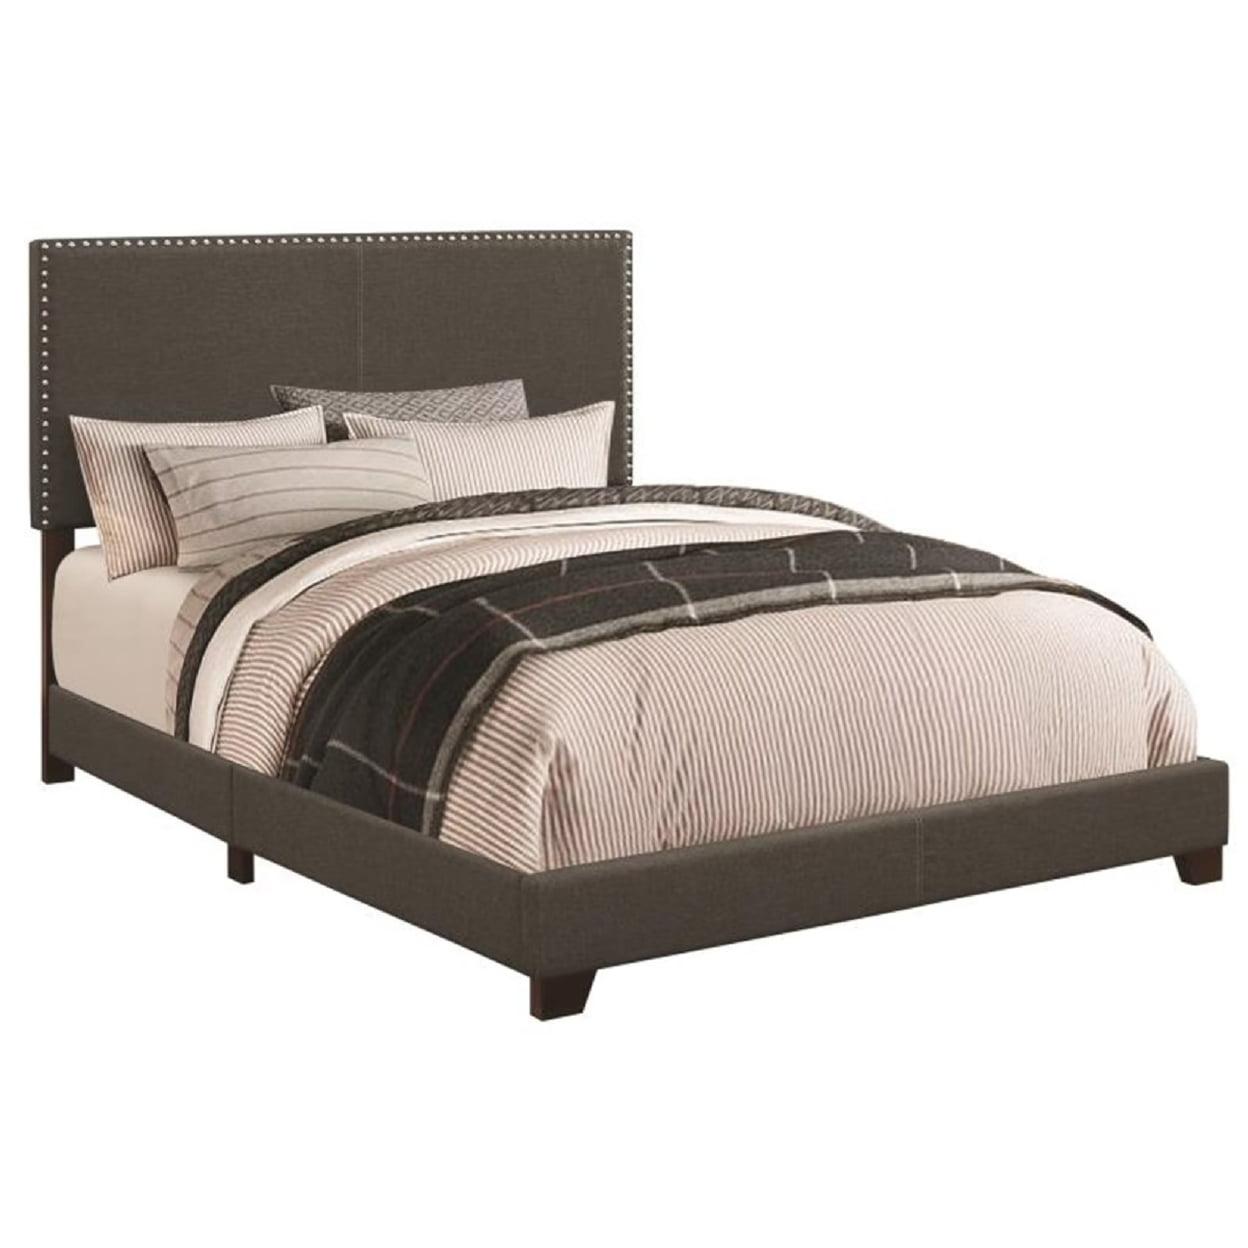 Charcoal Gray Queen Upholstered Bed with Sleek Nailhead Trim